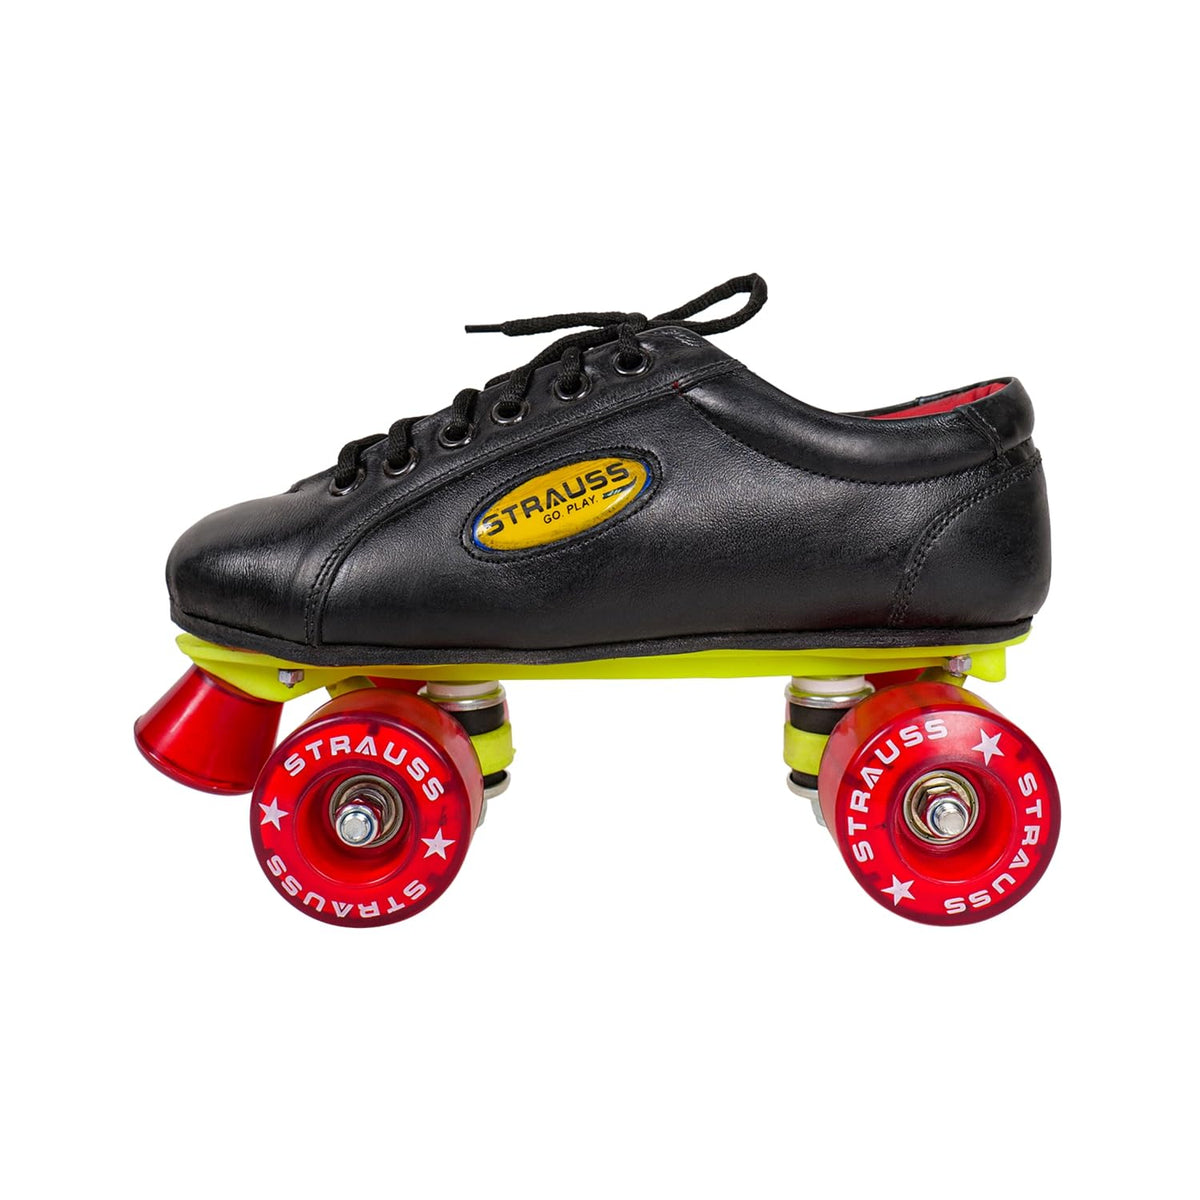 STRAUSS Gripper Skating Shoes | Fixed Body Roller Skates | Shoe Skate with PVC Wheel |Ideal for Boys, Girls and Kids |Suitable for All Skill Level | Ideal for Junior (12-13 Years) Size-5, (Red/Black)